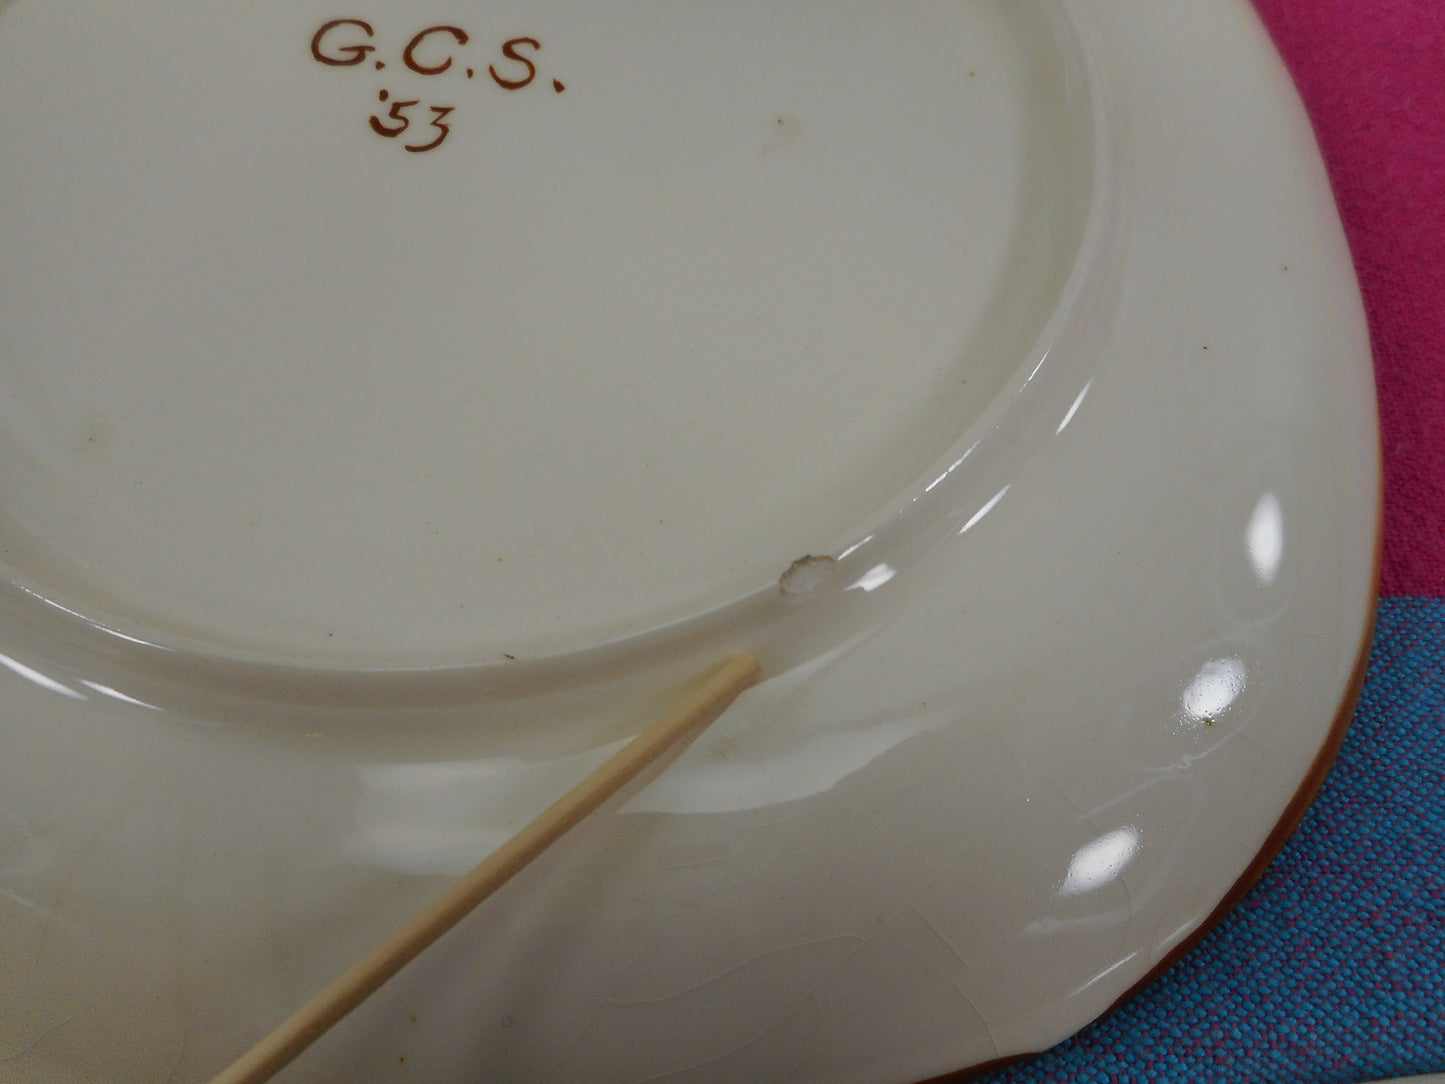 Arts Crafts Colony Signed G.C.S. 1950s Square Plates Brown White Pottery - chip